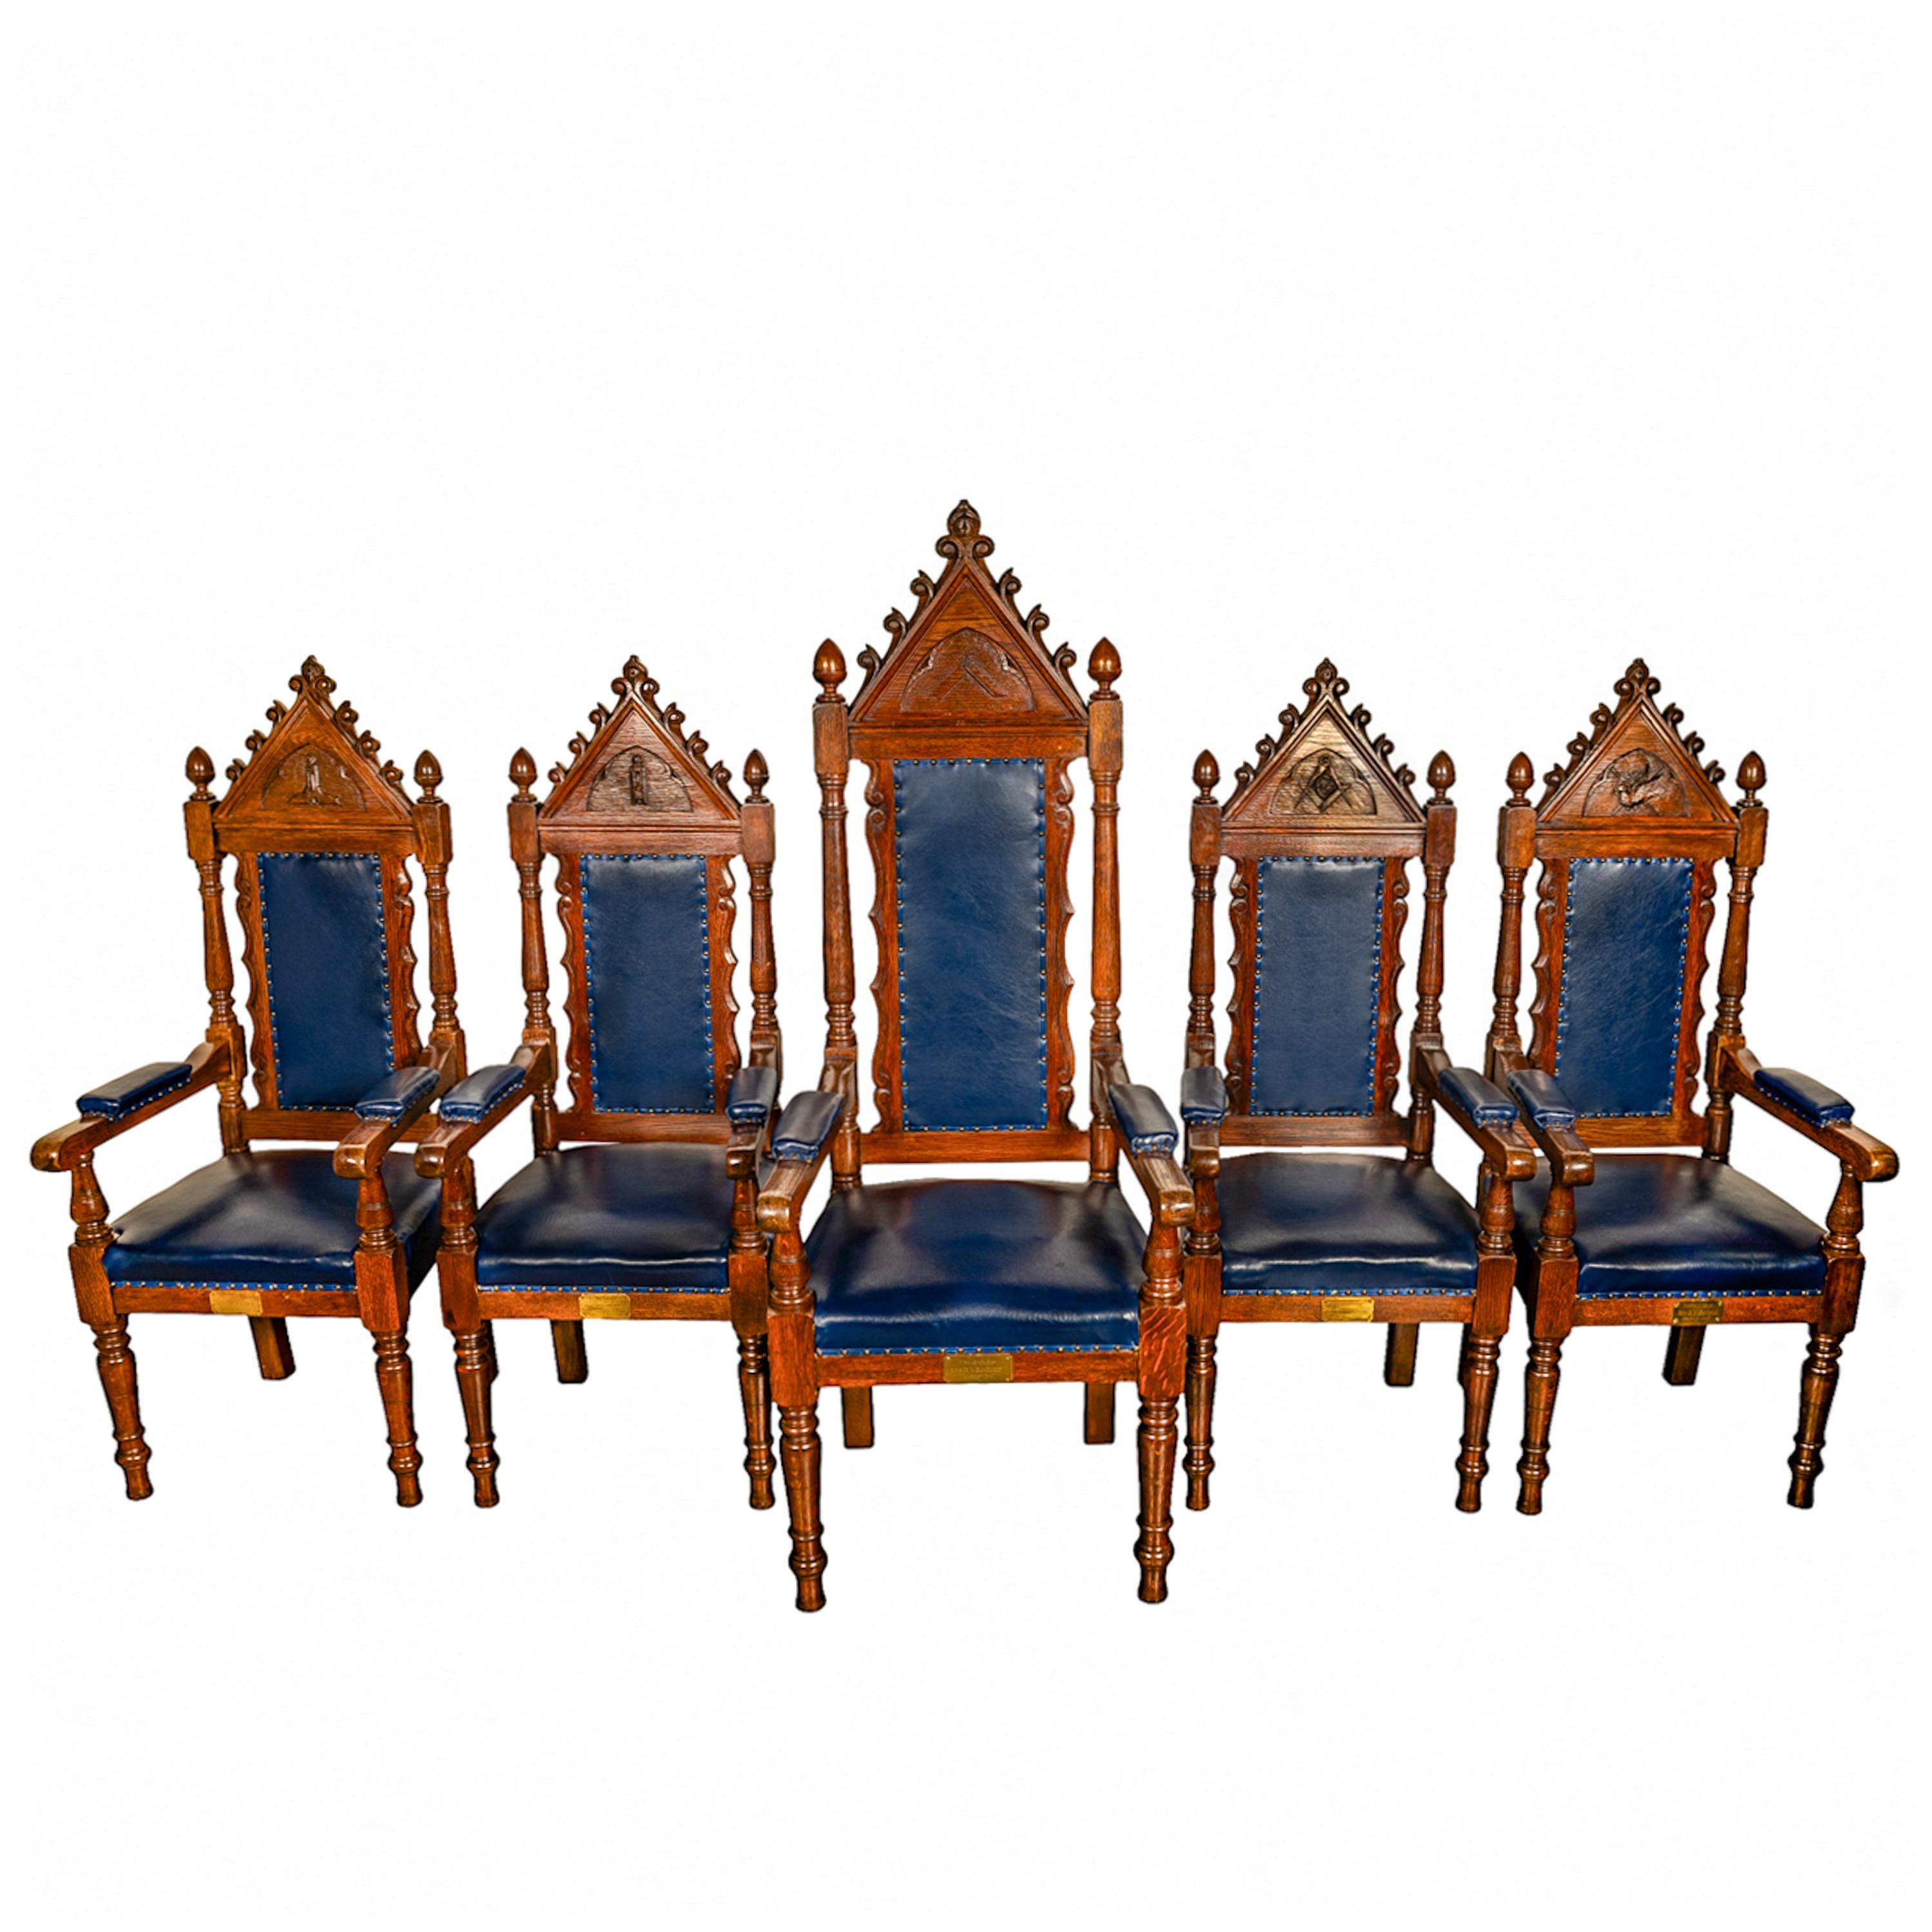 Antique Set of 5 Gothic Revival Irish Masonic Oak & Leather Throne Chairs 1900 For Sale